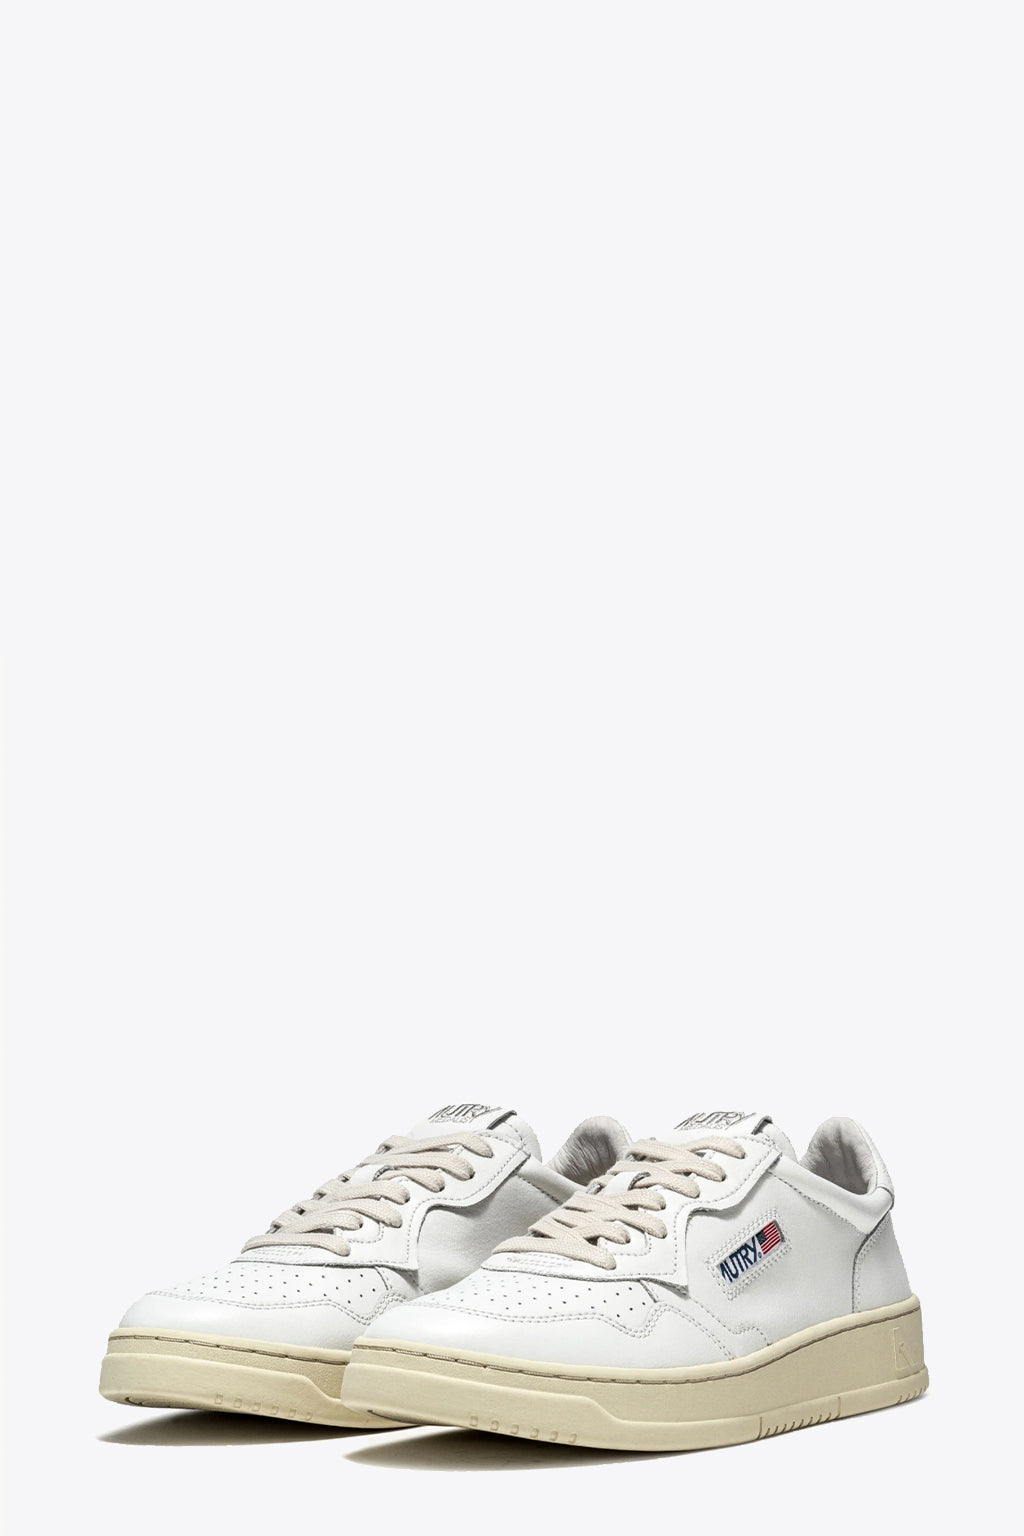 alt-image__White-leather-low-sneaker---Medalist